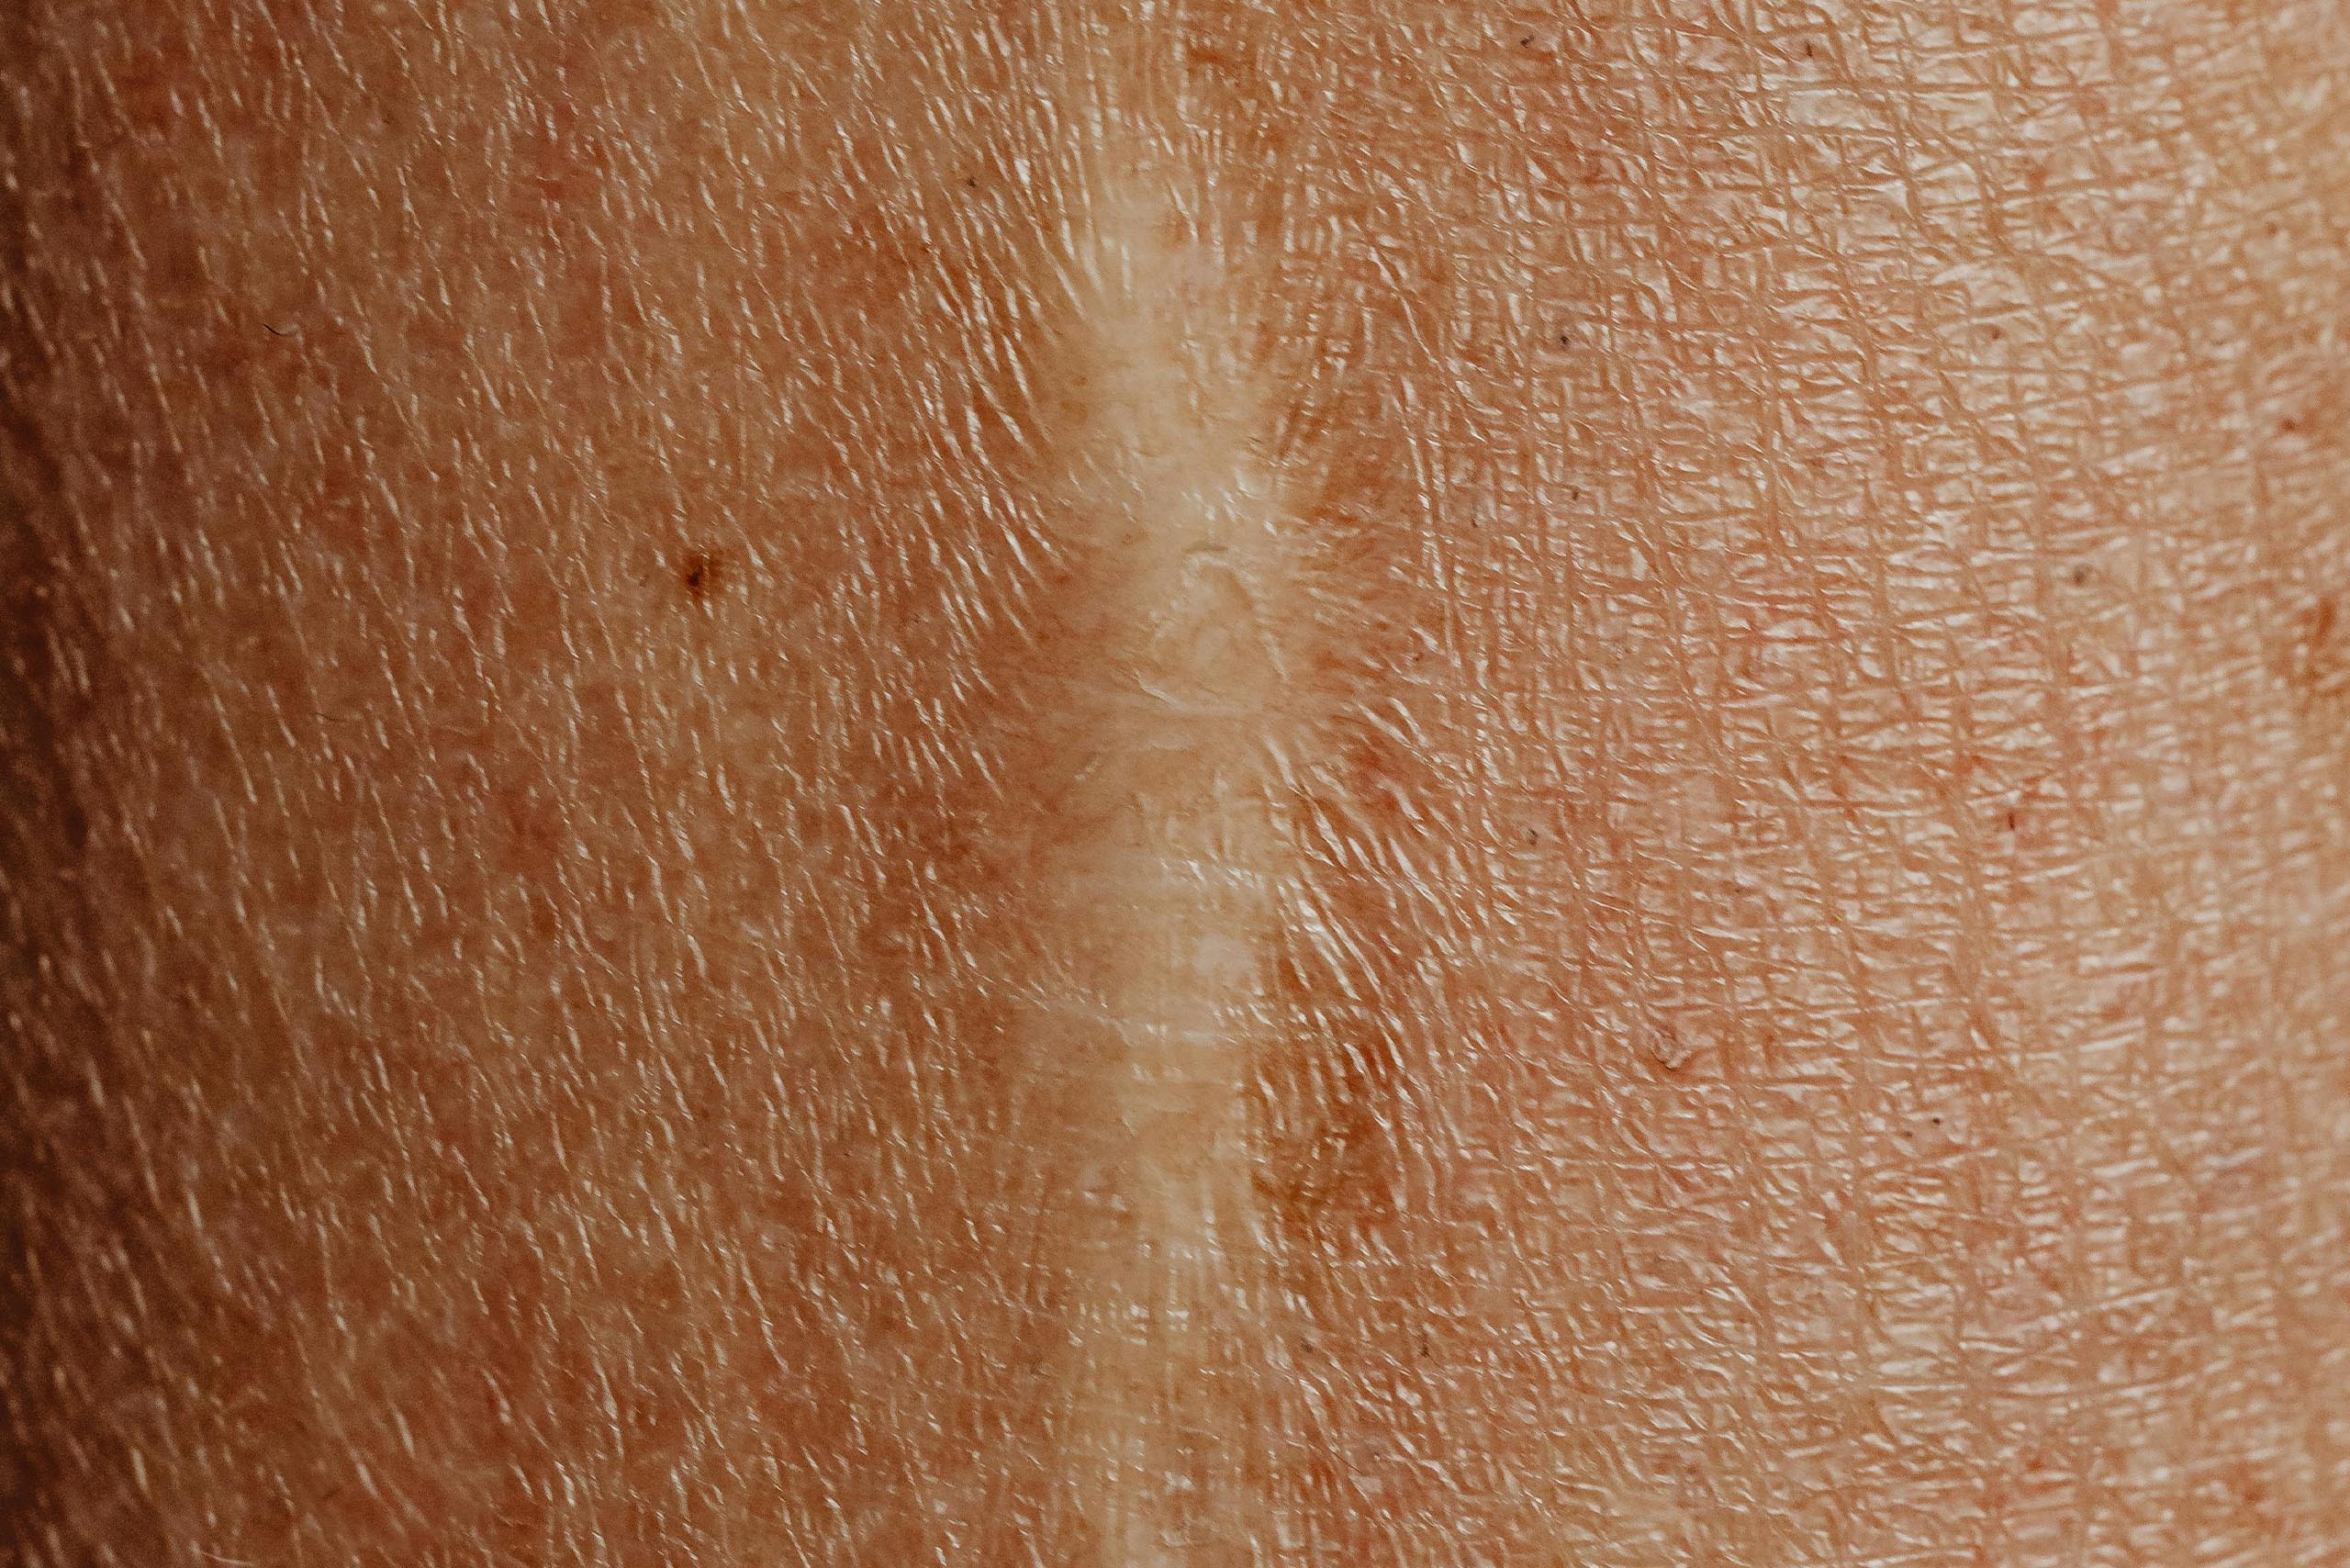 an image of a scar that is slowly healing